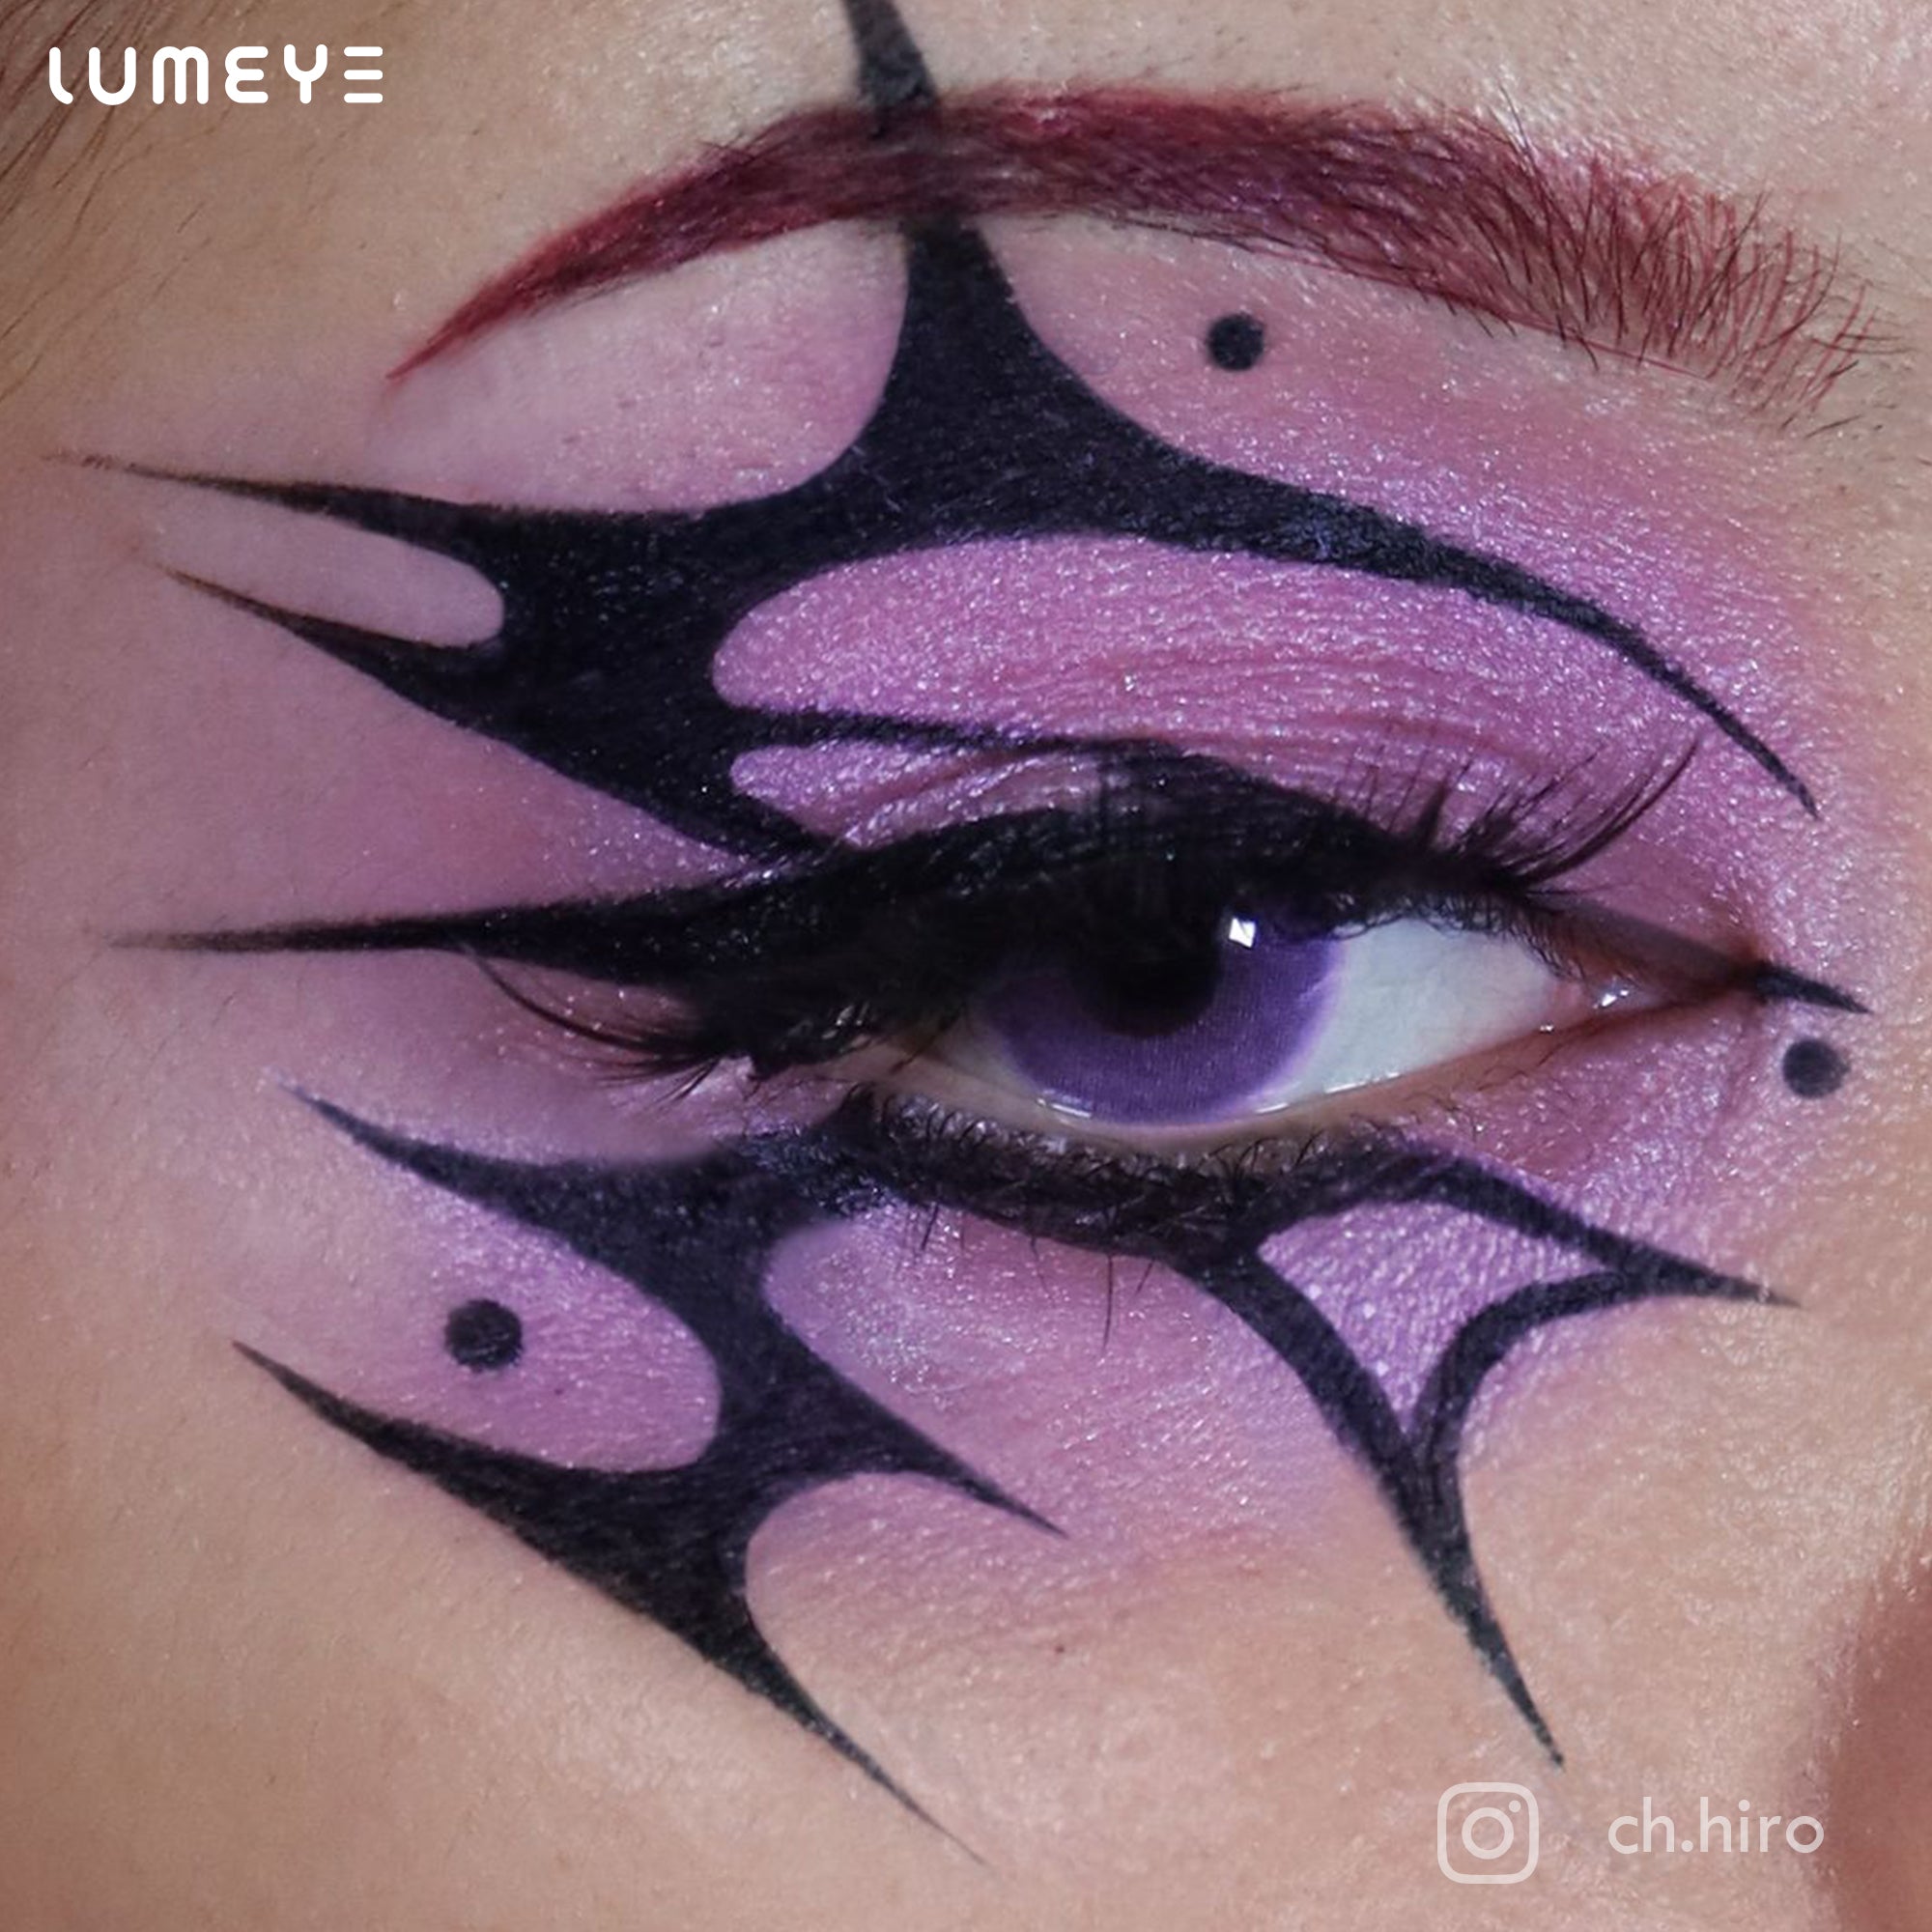 Best COLORED CONTACTS - LUMEYE Lilac Purple Colored Contact Lenses - LUMEYE